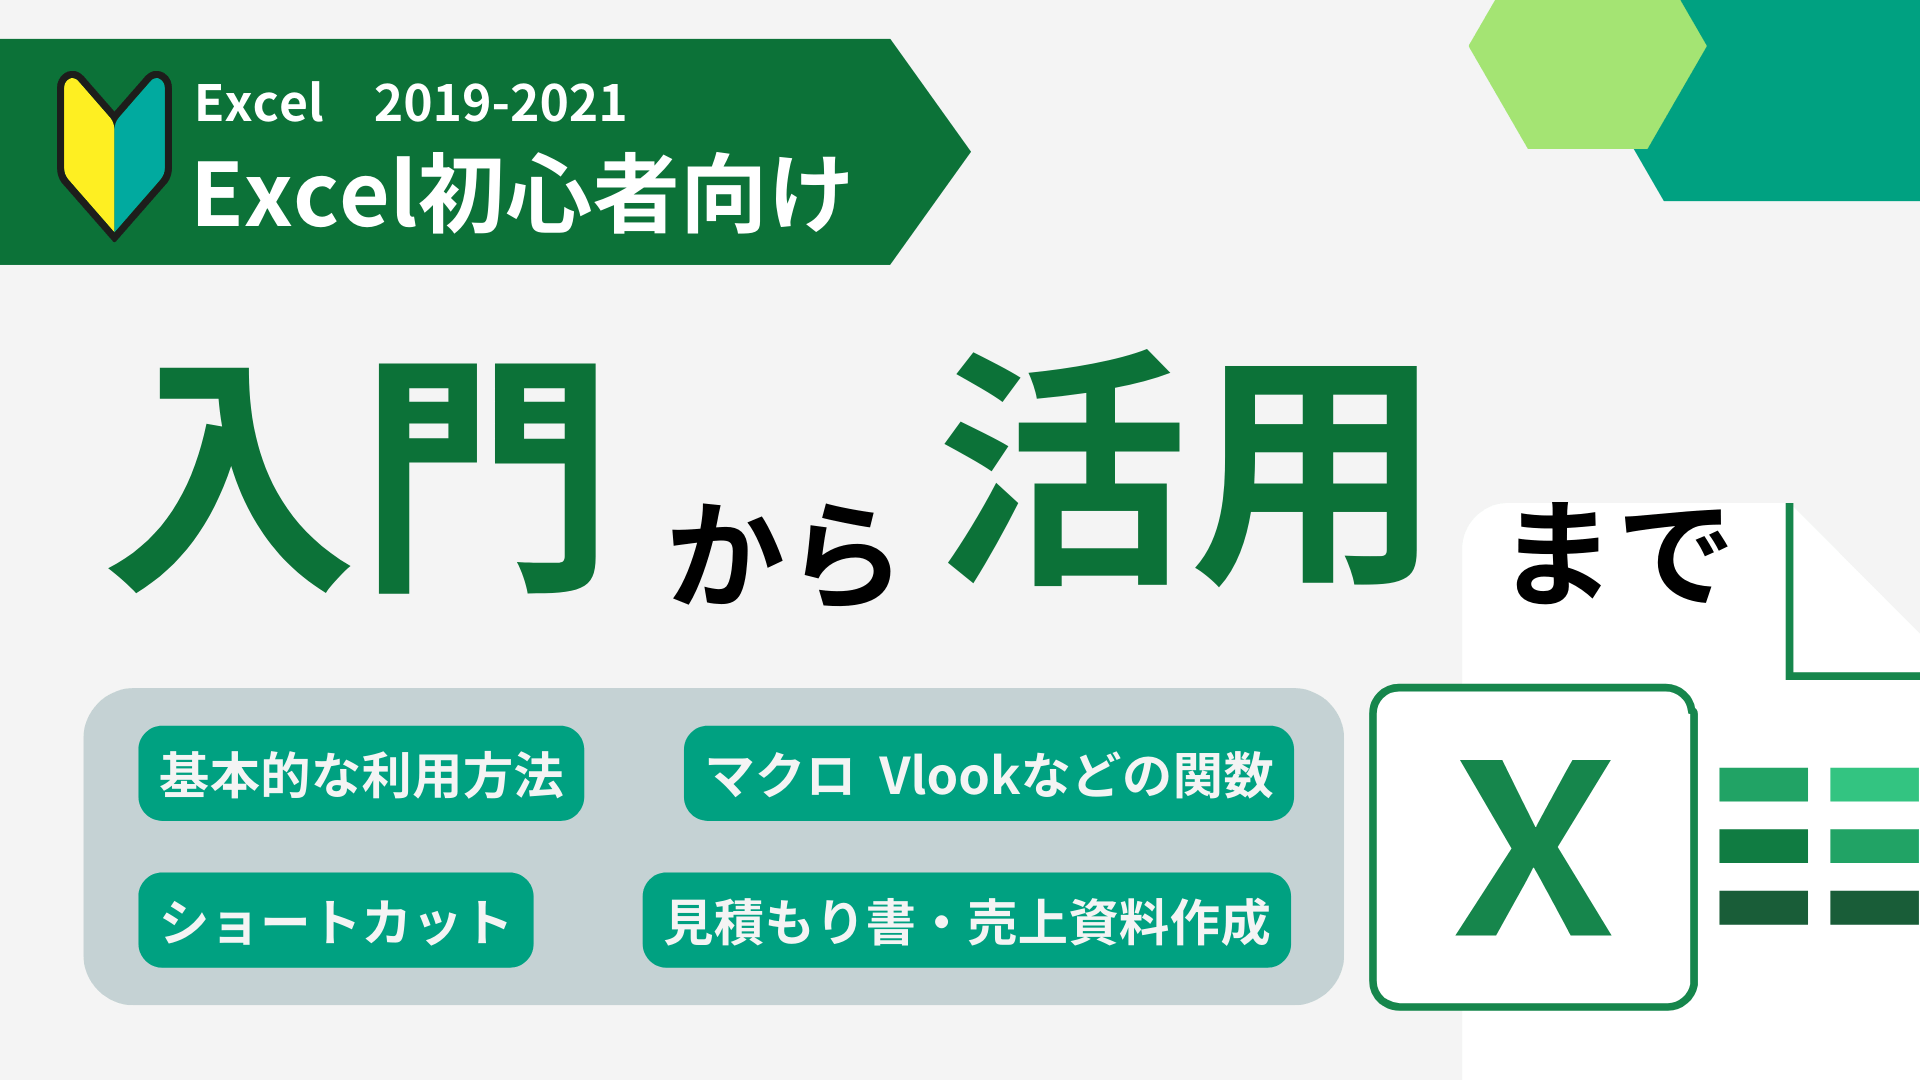 Excel 2019-2021 Learning（入門から活用まで）